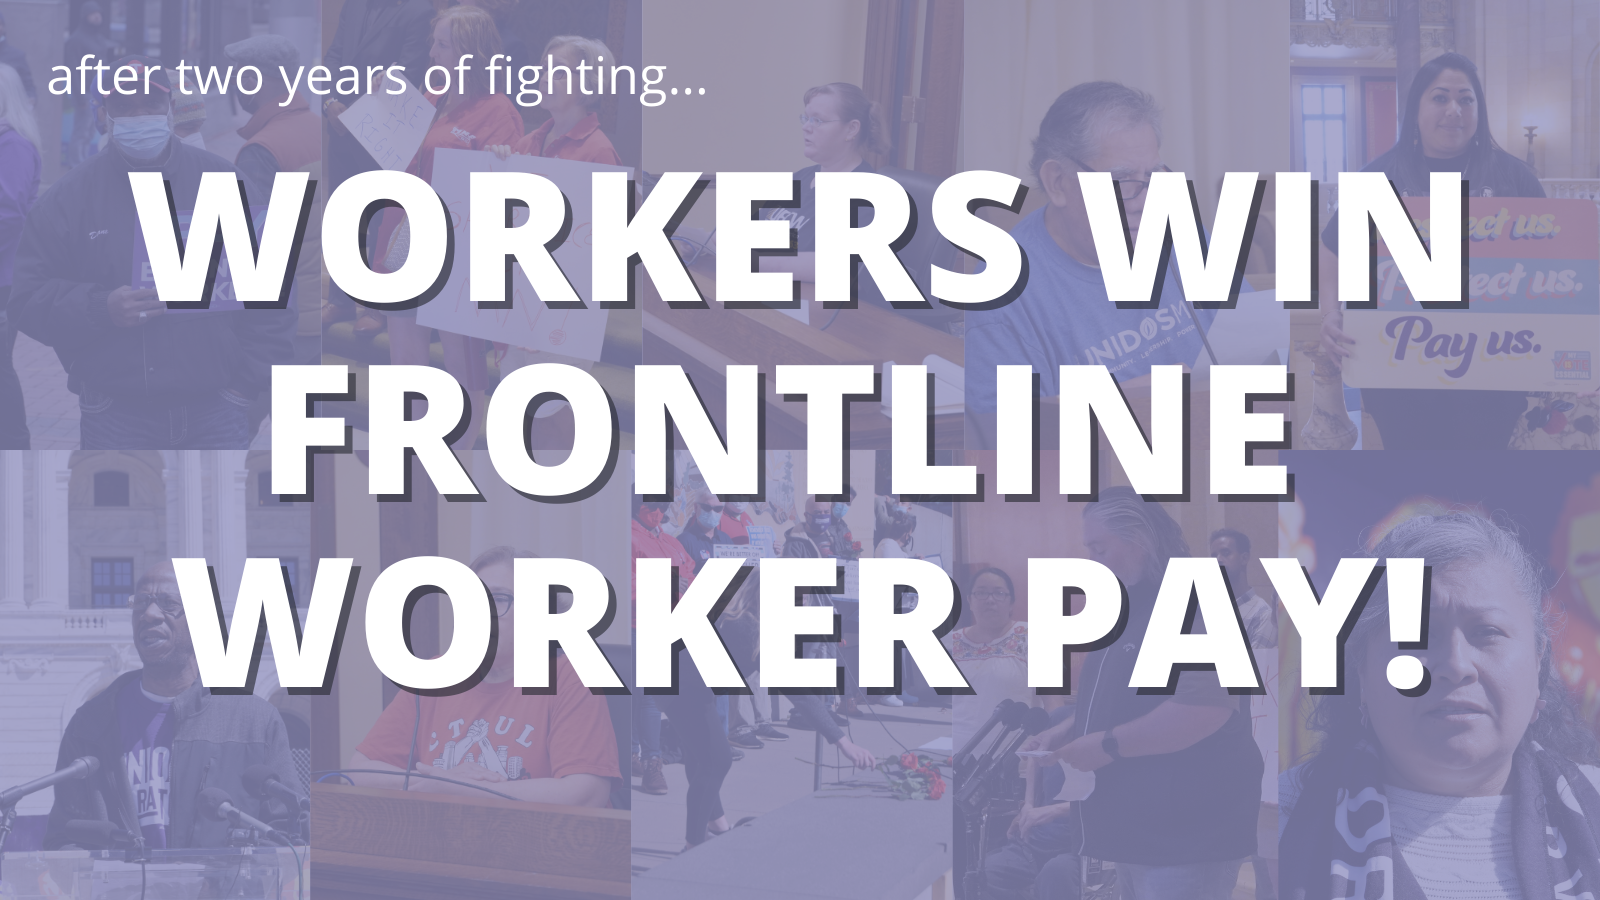 Frontline Coalition Overdue Passage of Frontline Worker Pay as